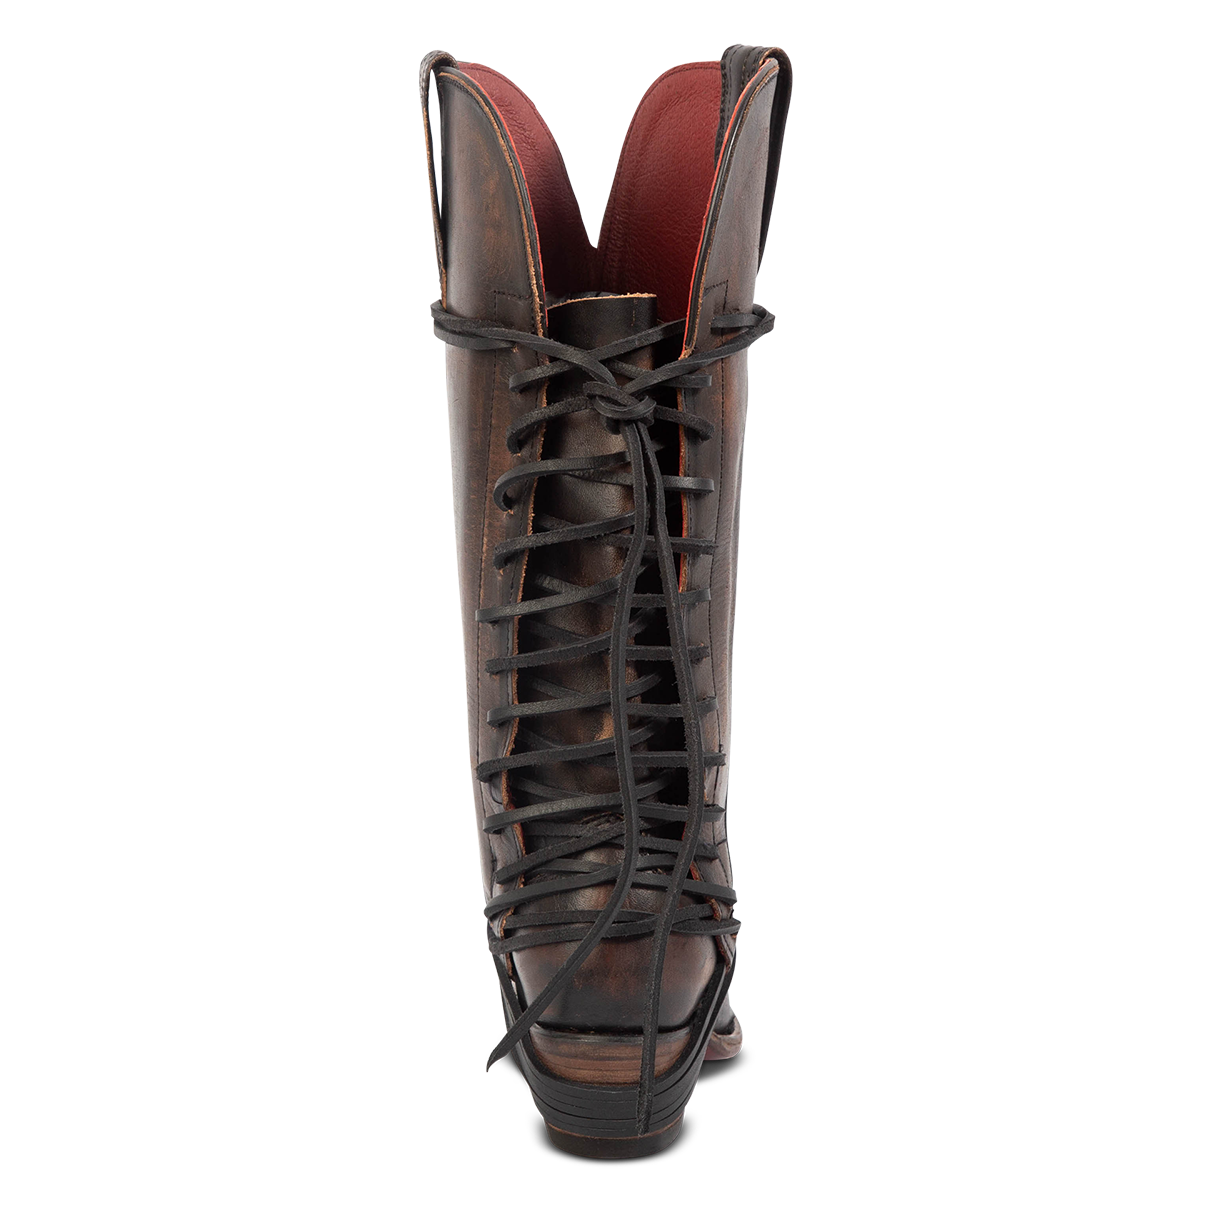 Back view showing back lace panel and low heel on FREEBIRD women's Woodland black leather cowboy boot